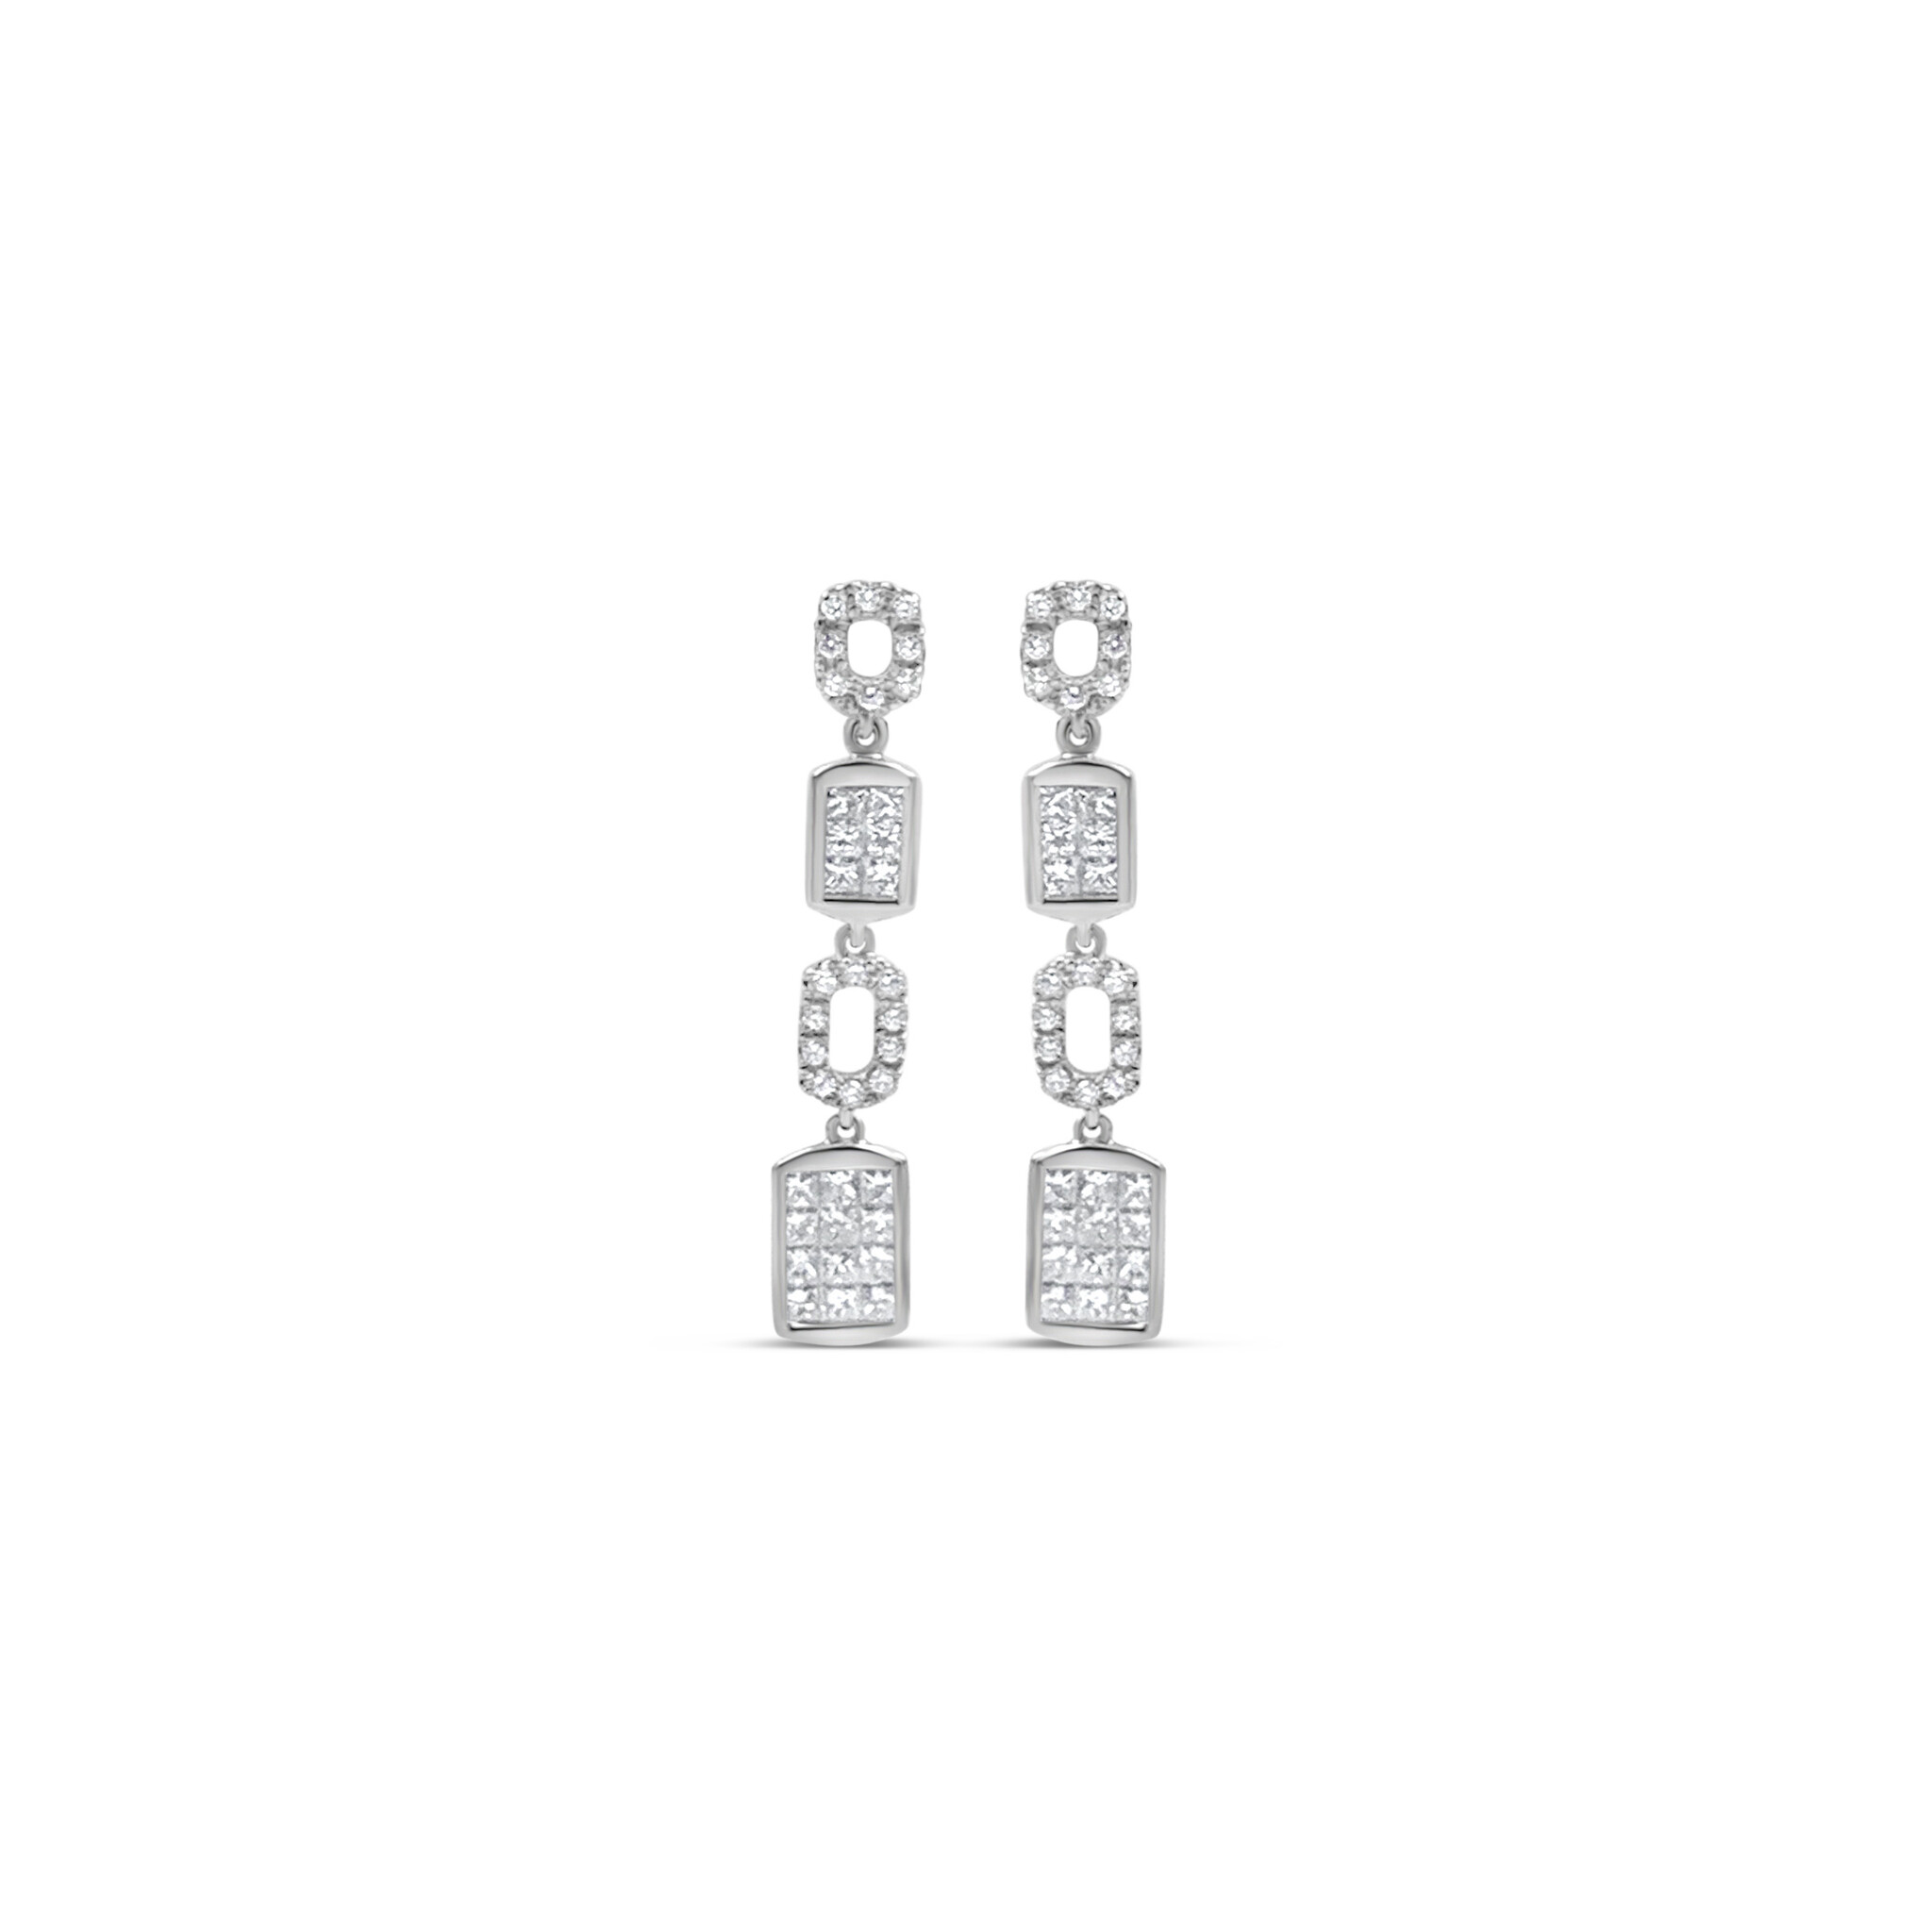 18k white gold earrings with 1,46ct diamonds